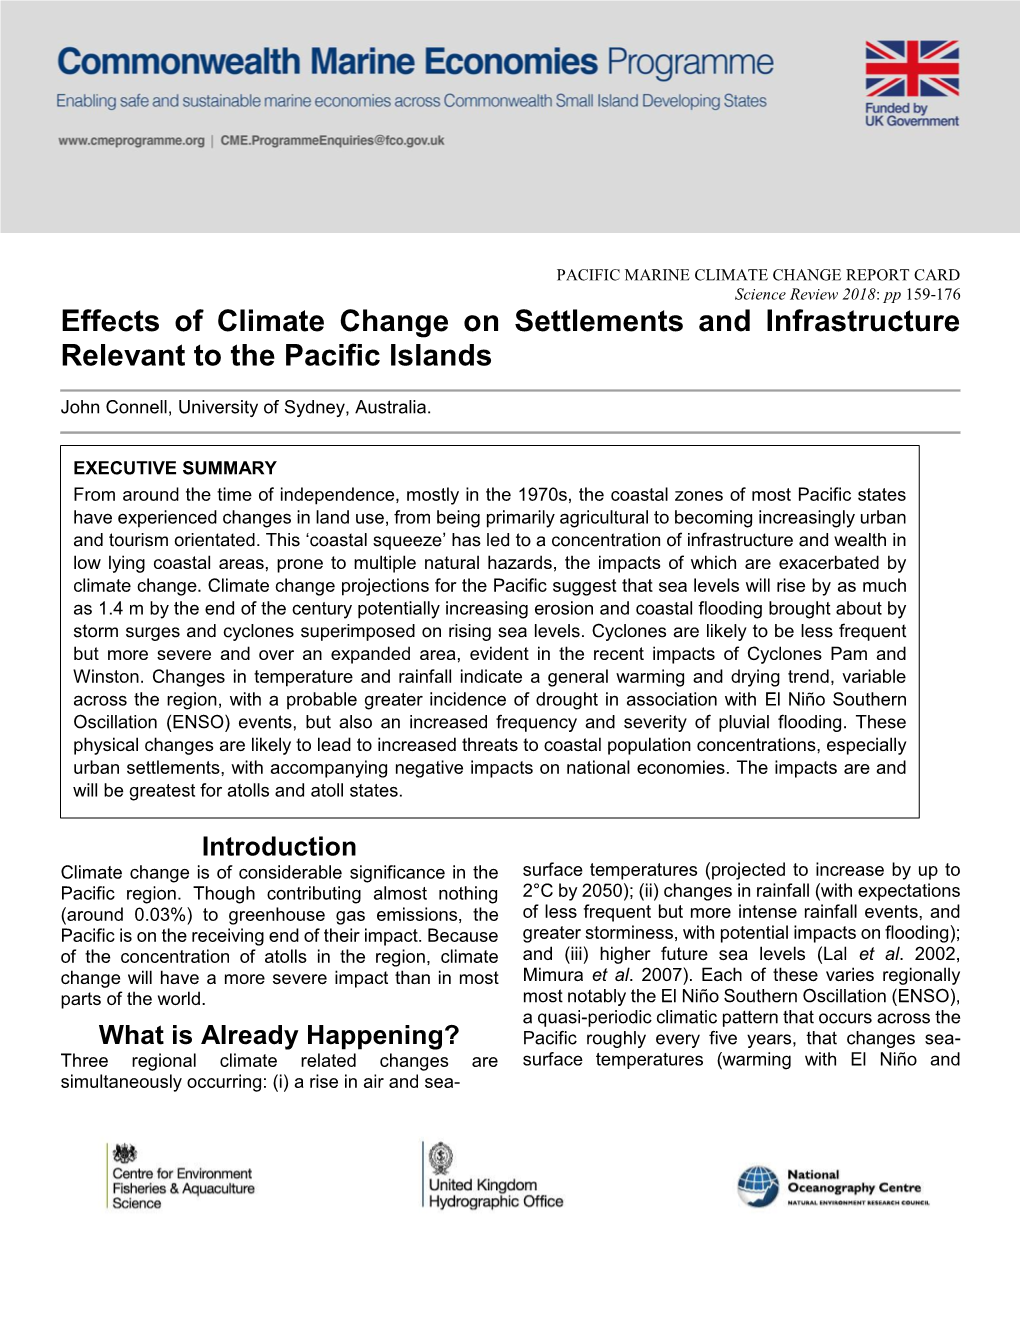 Effects of Climate Change on Settlements and Infrastructure Relevant to the Pacific Islands